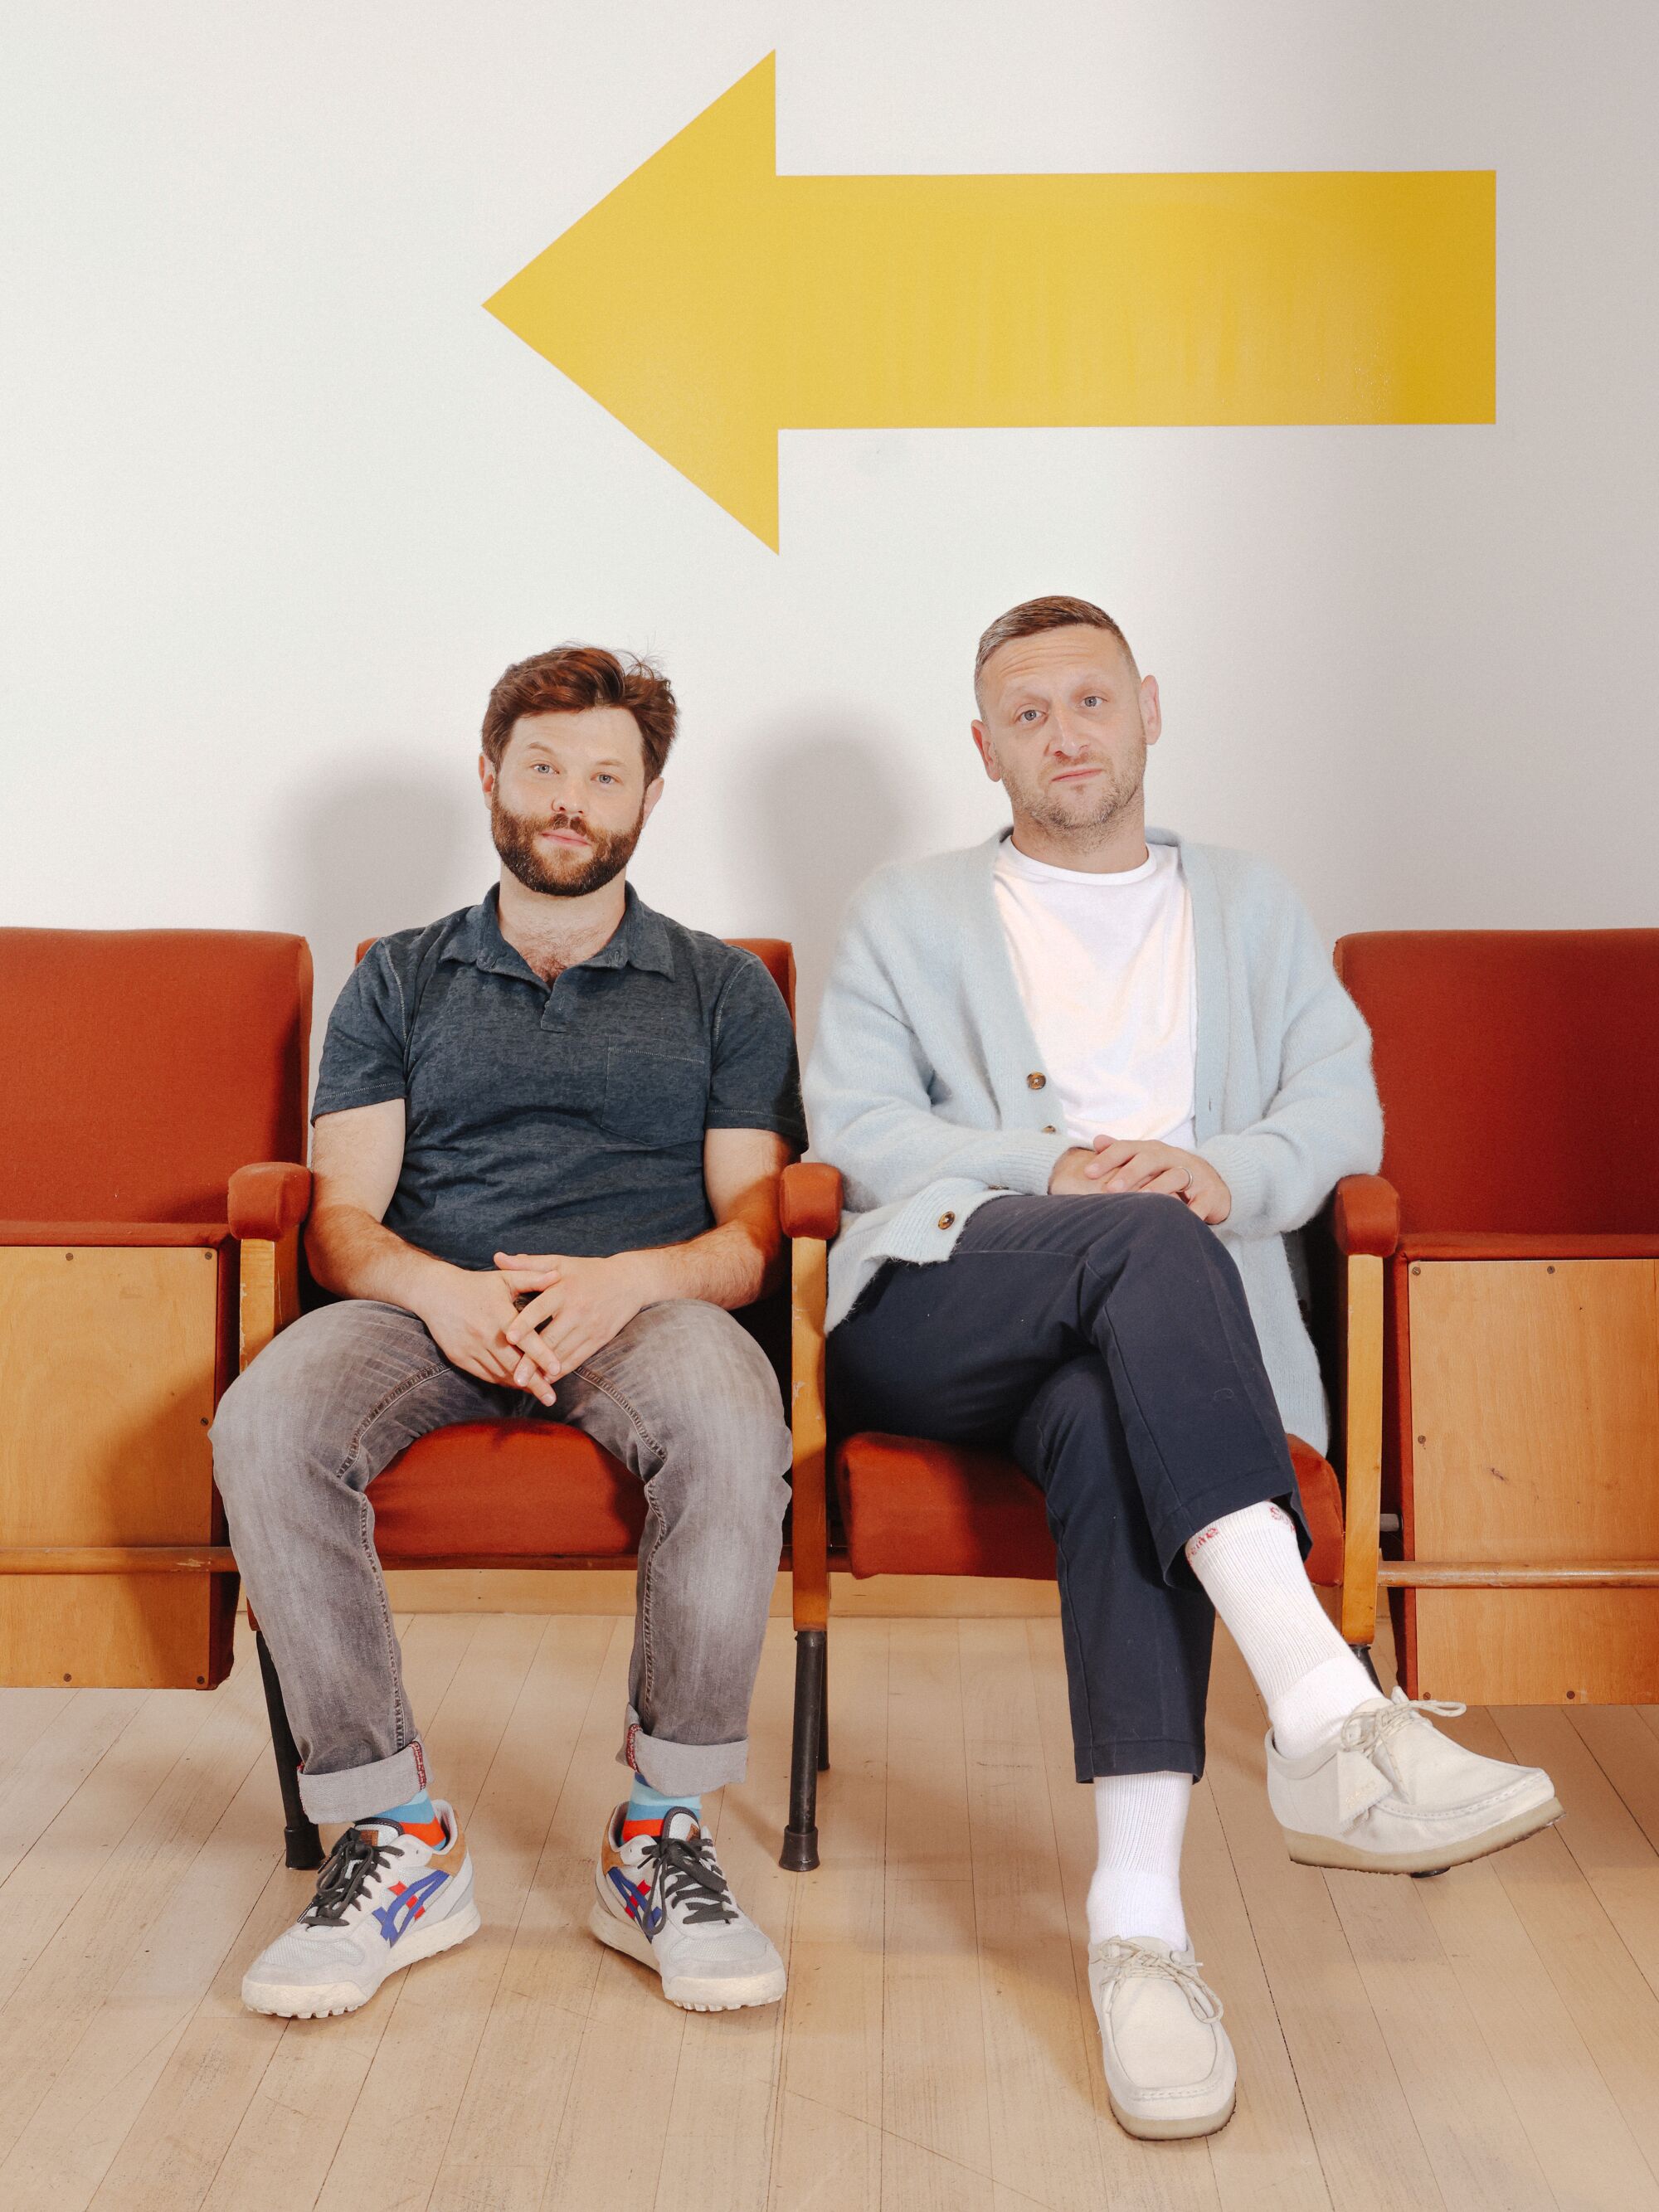 Two men sit in chairs with a large yellow arrow on the wall behind them.